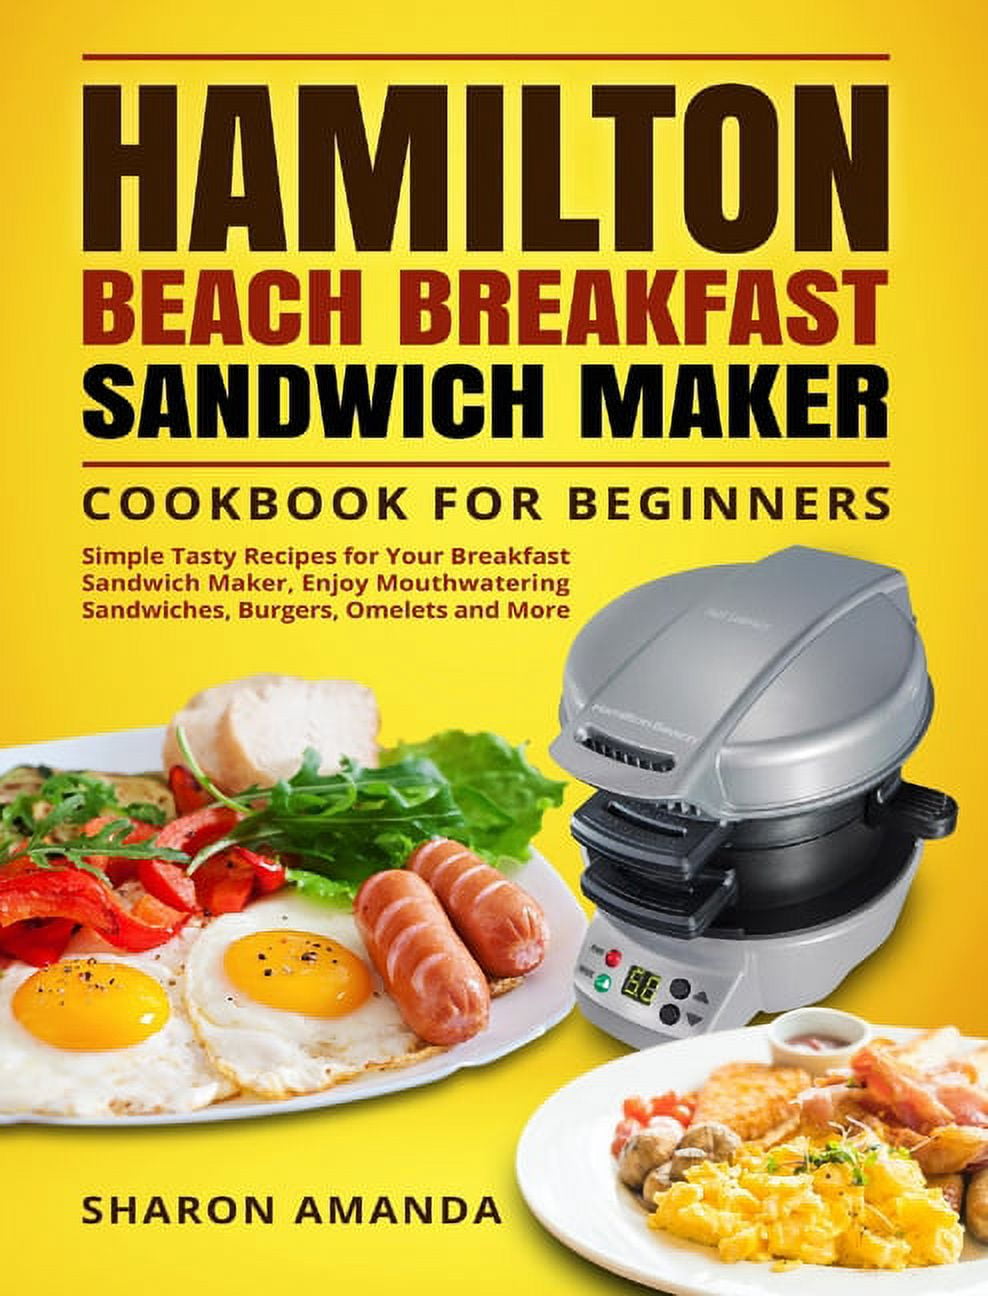 Hamilton Beach Breakfast Sandwich Maker Cookbook for Beginners: Simple  Tasty Recipes for Your Breakfast Sandwich Maker, Enjoy Mouthwatering  Sandwiches (Paperback)